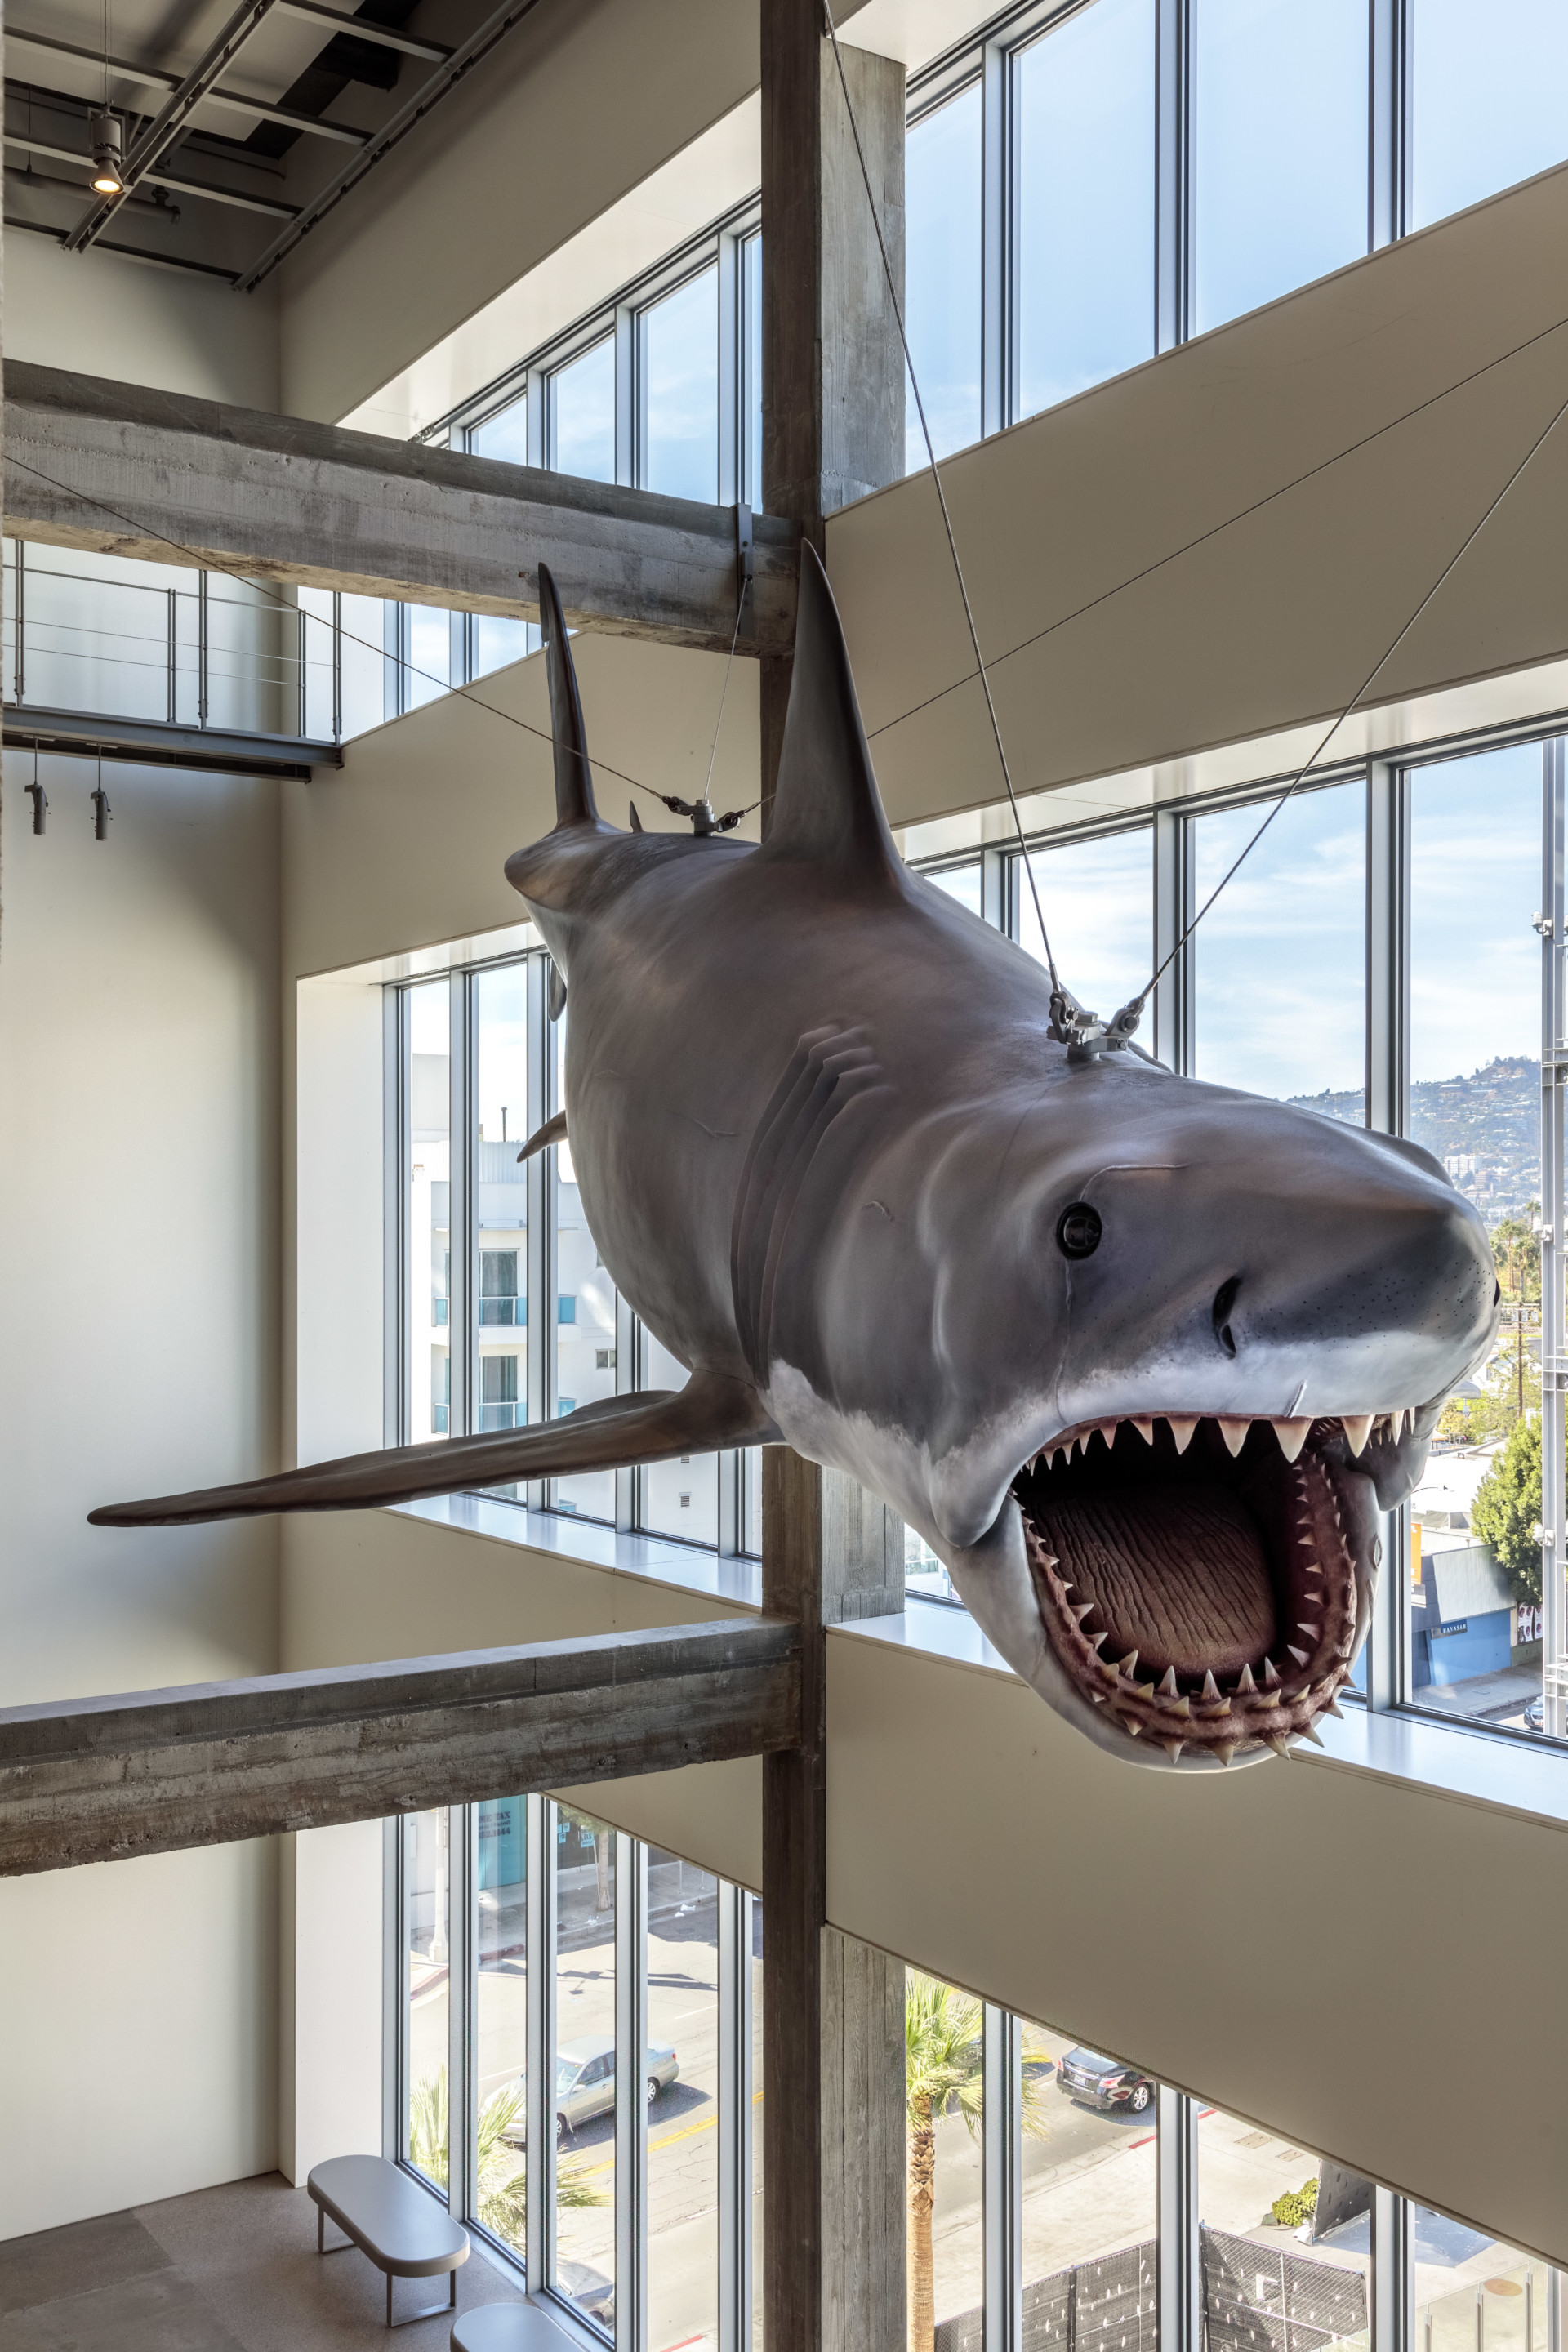 photograph depicting a suspended animatronic shark in a museum